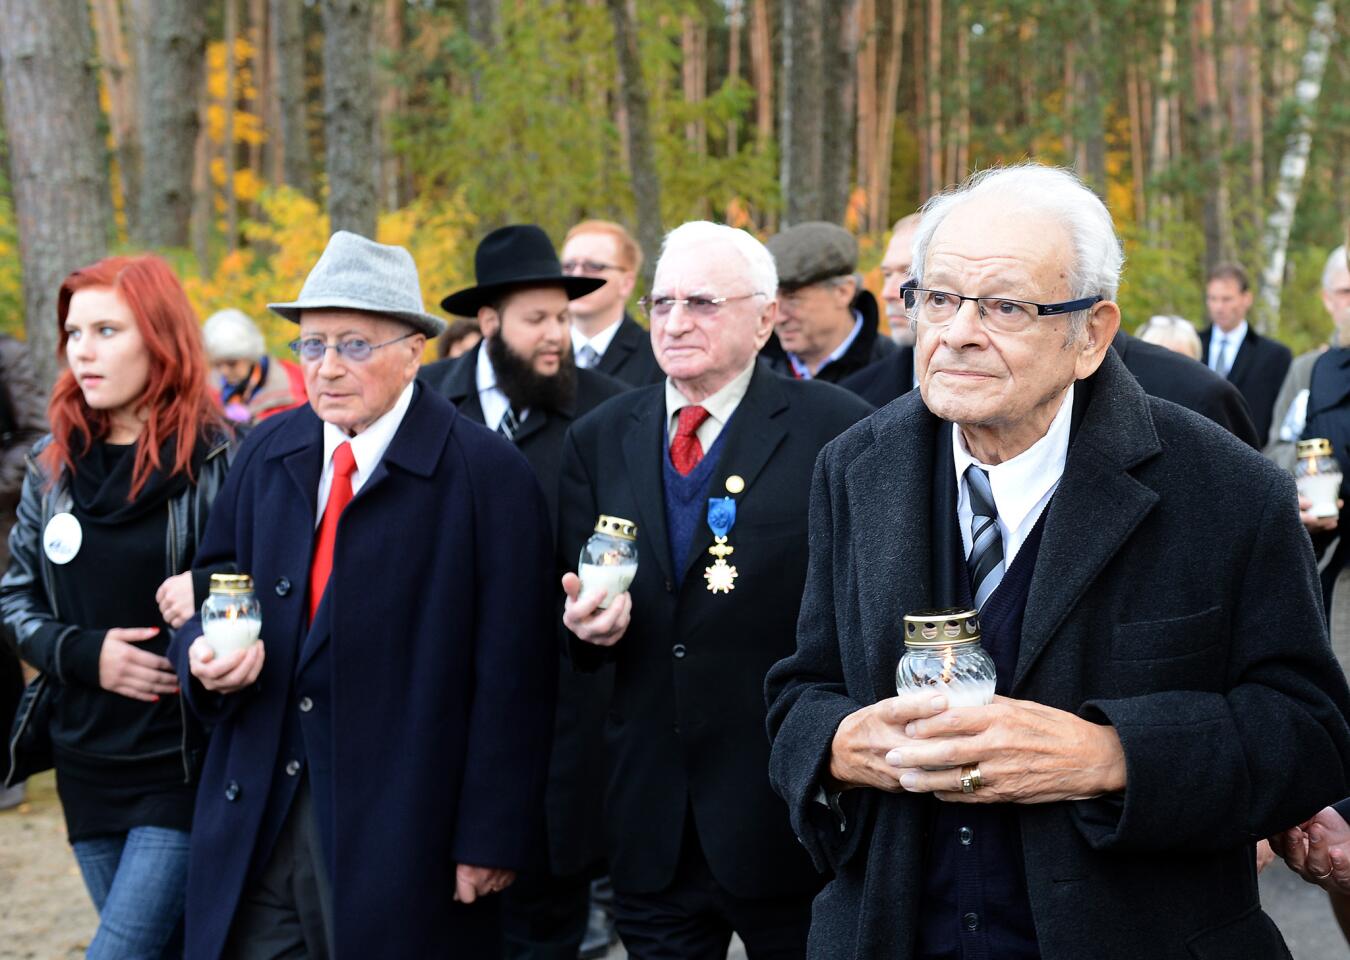 During a 2013 ceremony commemorating the 70th anniversary of a successful uprising at the Sobibor camp, insurgents Philip Bialowitz, from left, Thomas Blatt and Jules Schelvis light candles.